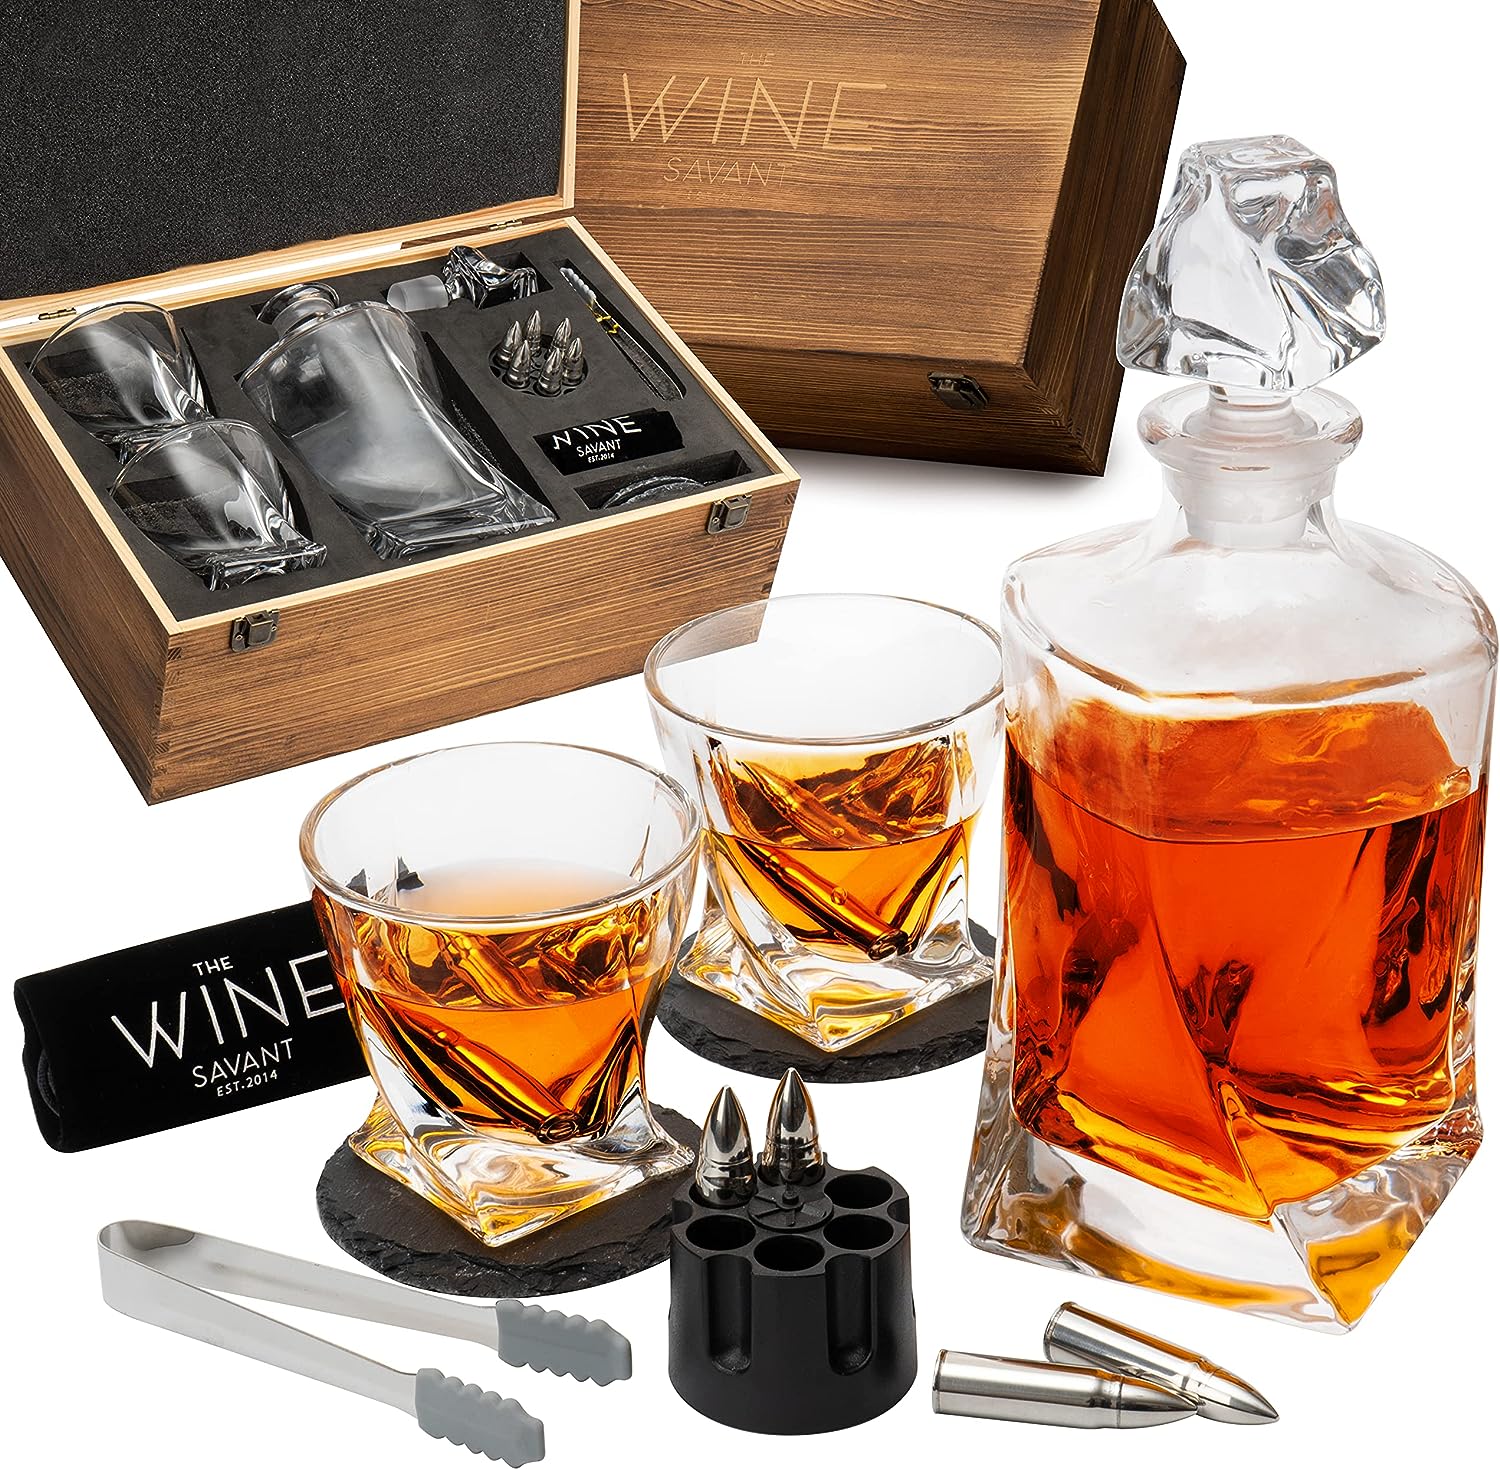 Luxury Whiskey Decanter and Glasses Set for Men & Women - Whiskey Decanter, 2 Twist Whiskey Glasses, 2 Coasters, 6 XL Stainless Steel Whisky Bullets, Tongs & Freezer Pouch Gift Box - The Wine Savant